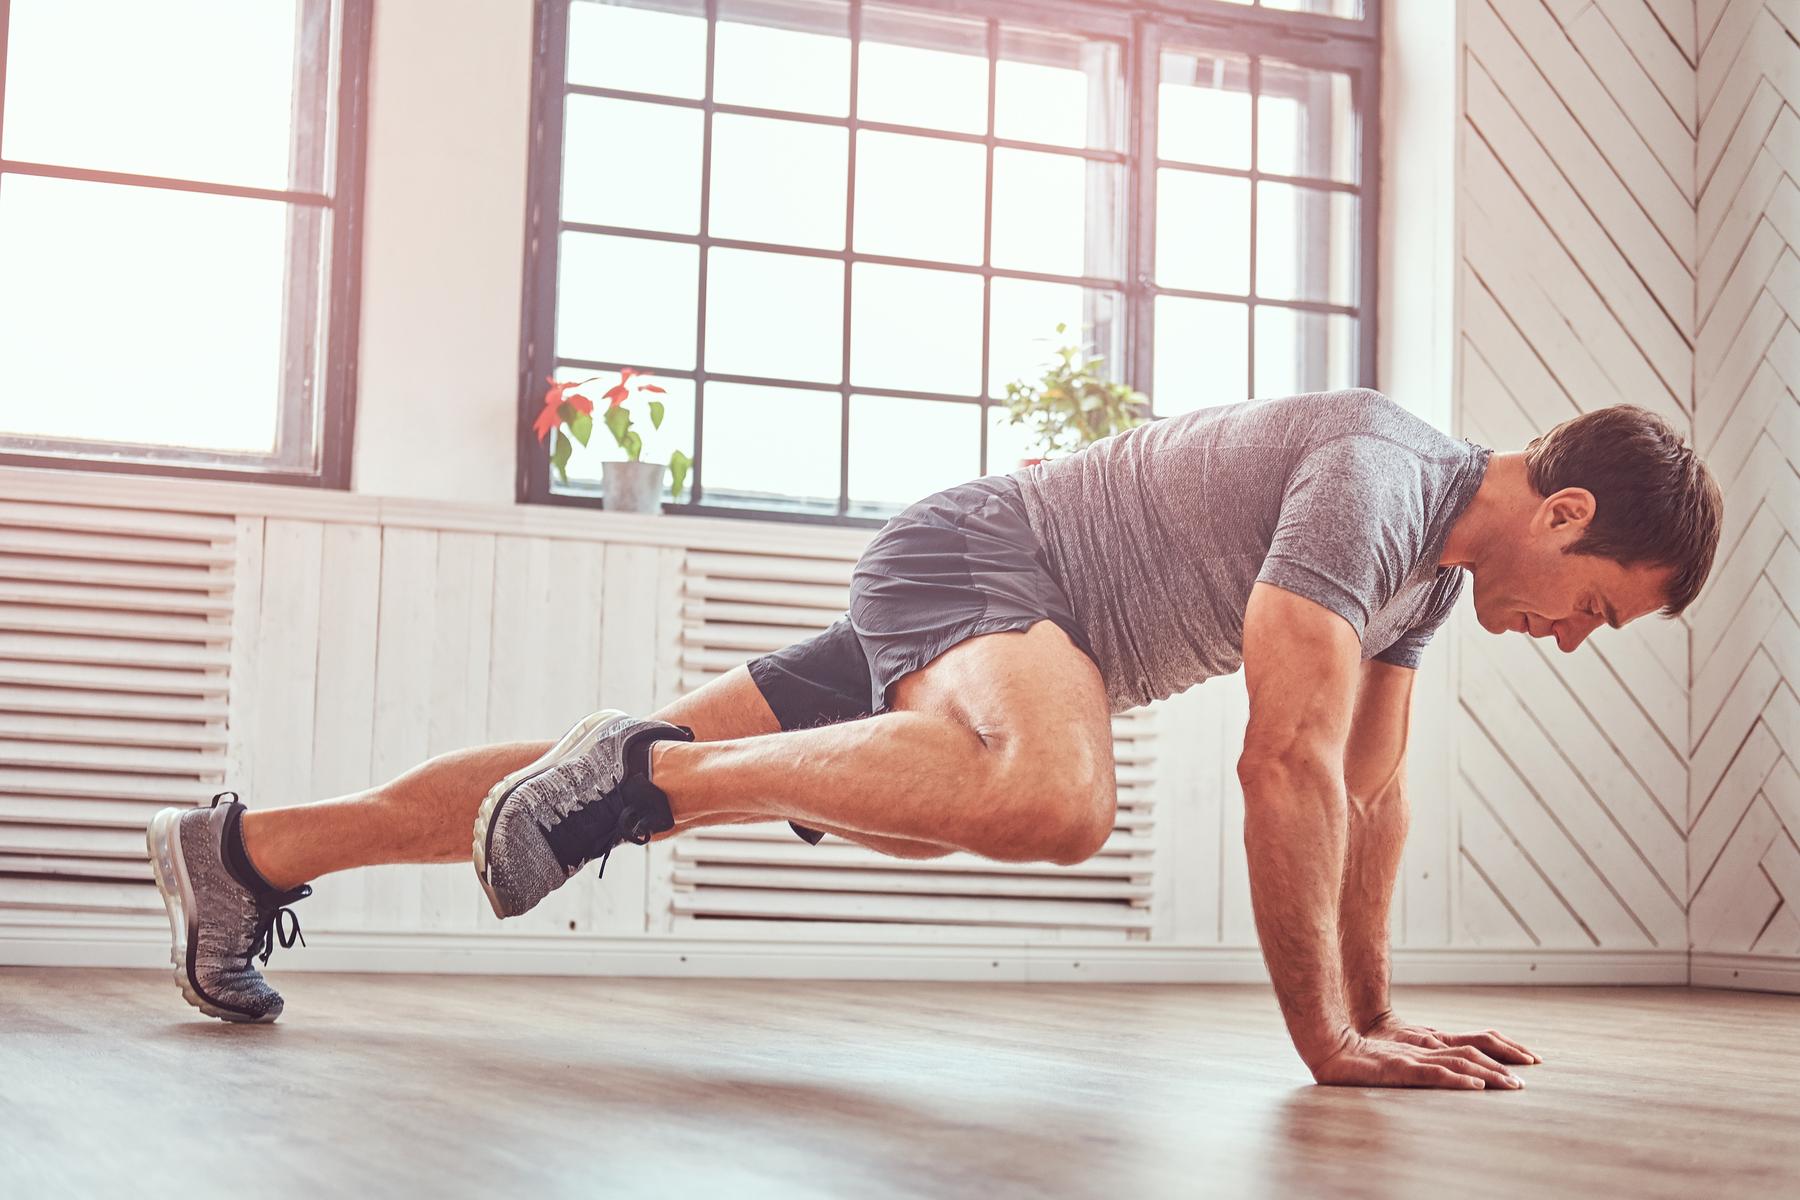 Can you build muscle and strength with bodyweight exercises?